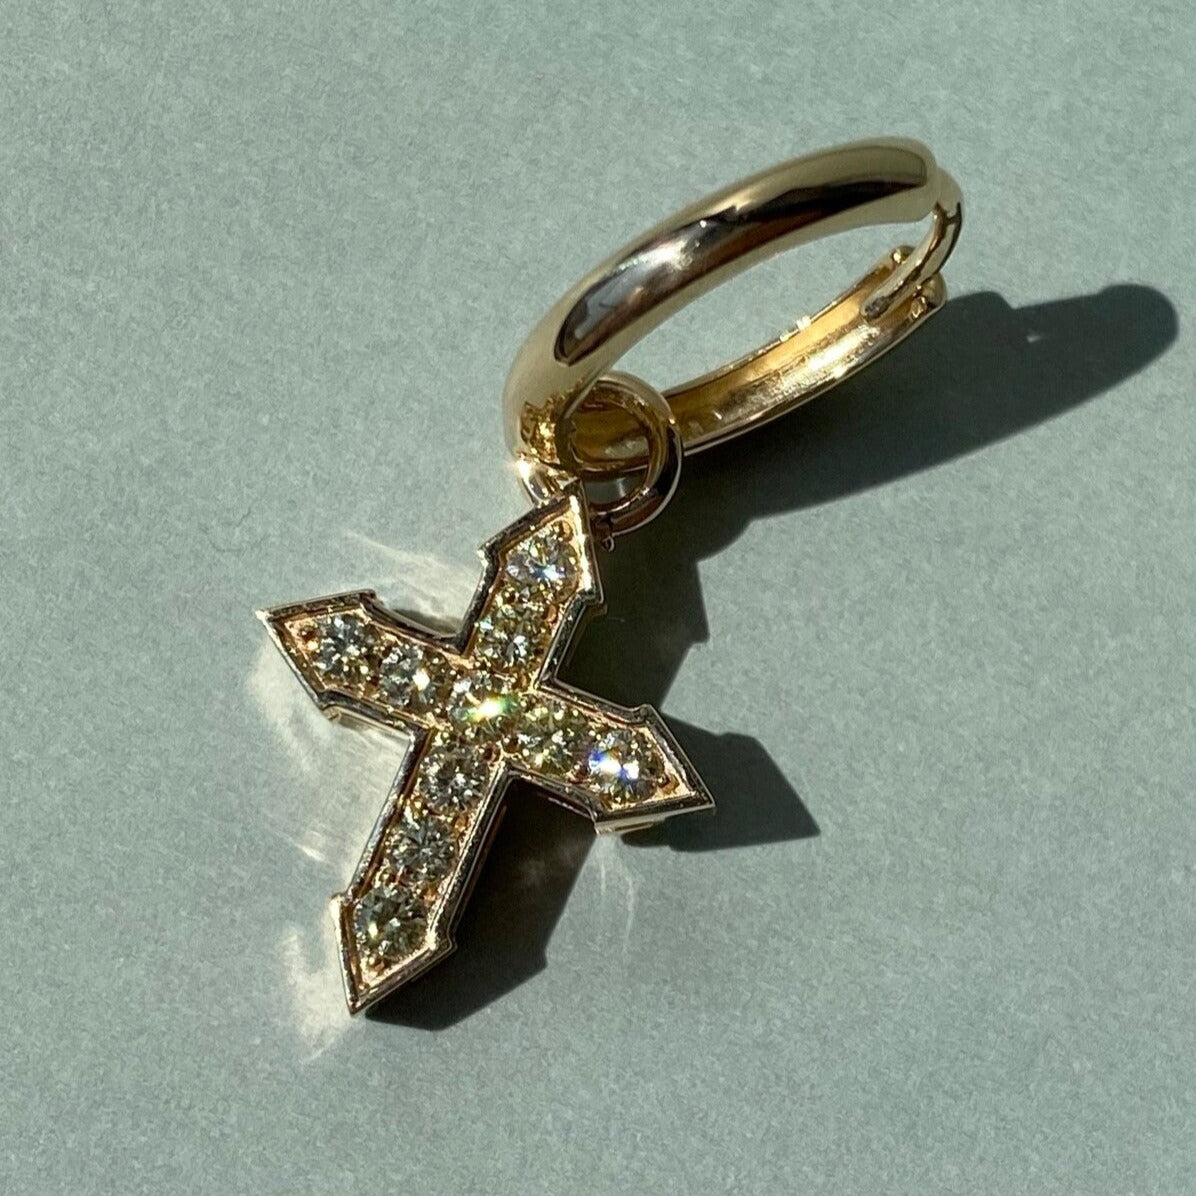 EARRING CROSS "GLOW" WITH YELLOW DIAMONDS / SOLID GOLD